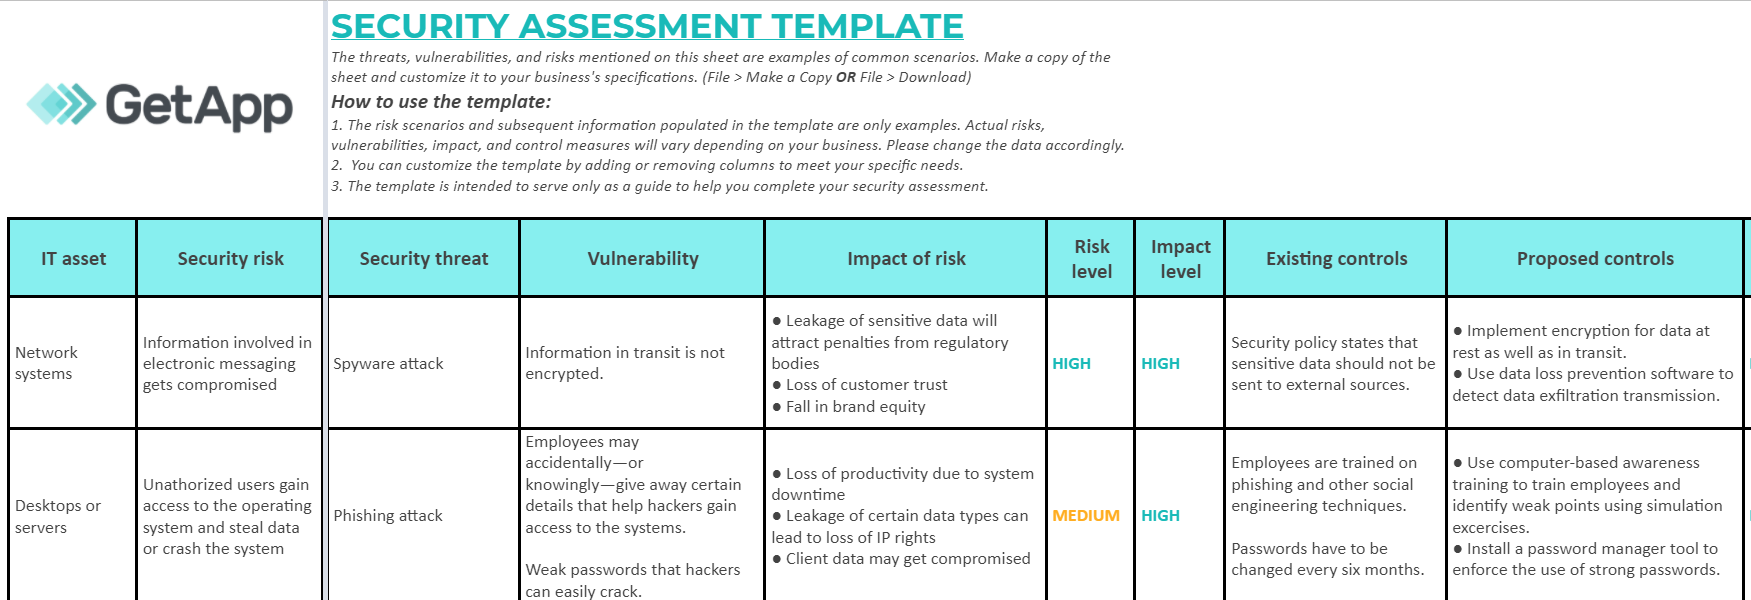 IT-security-assessment-template